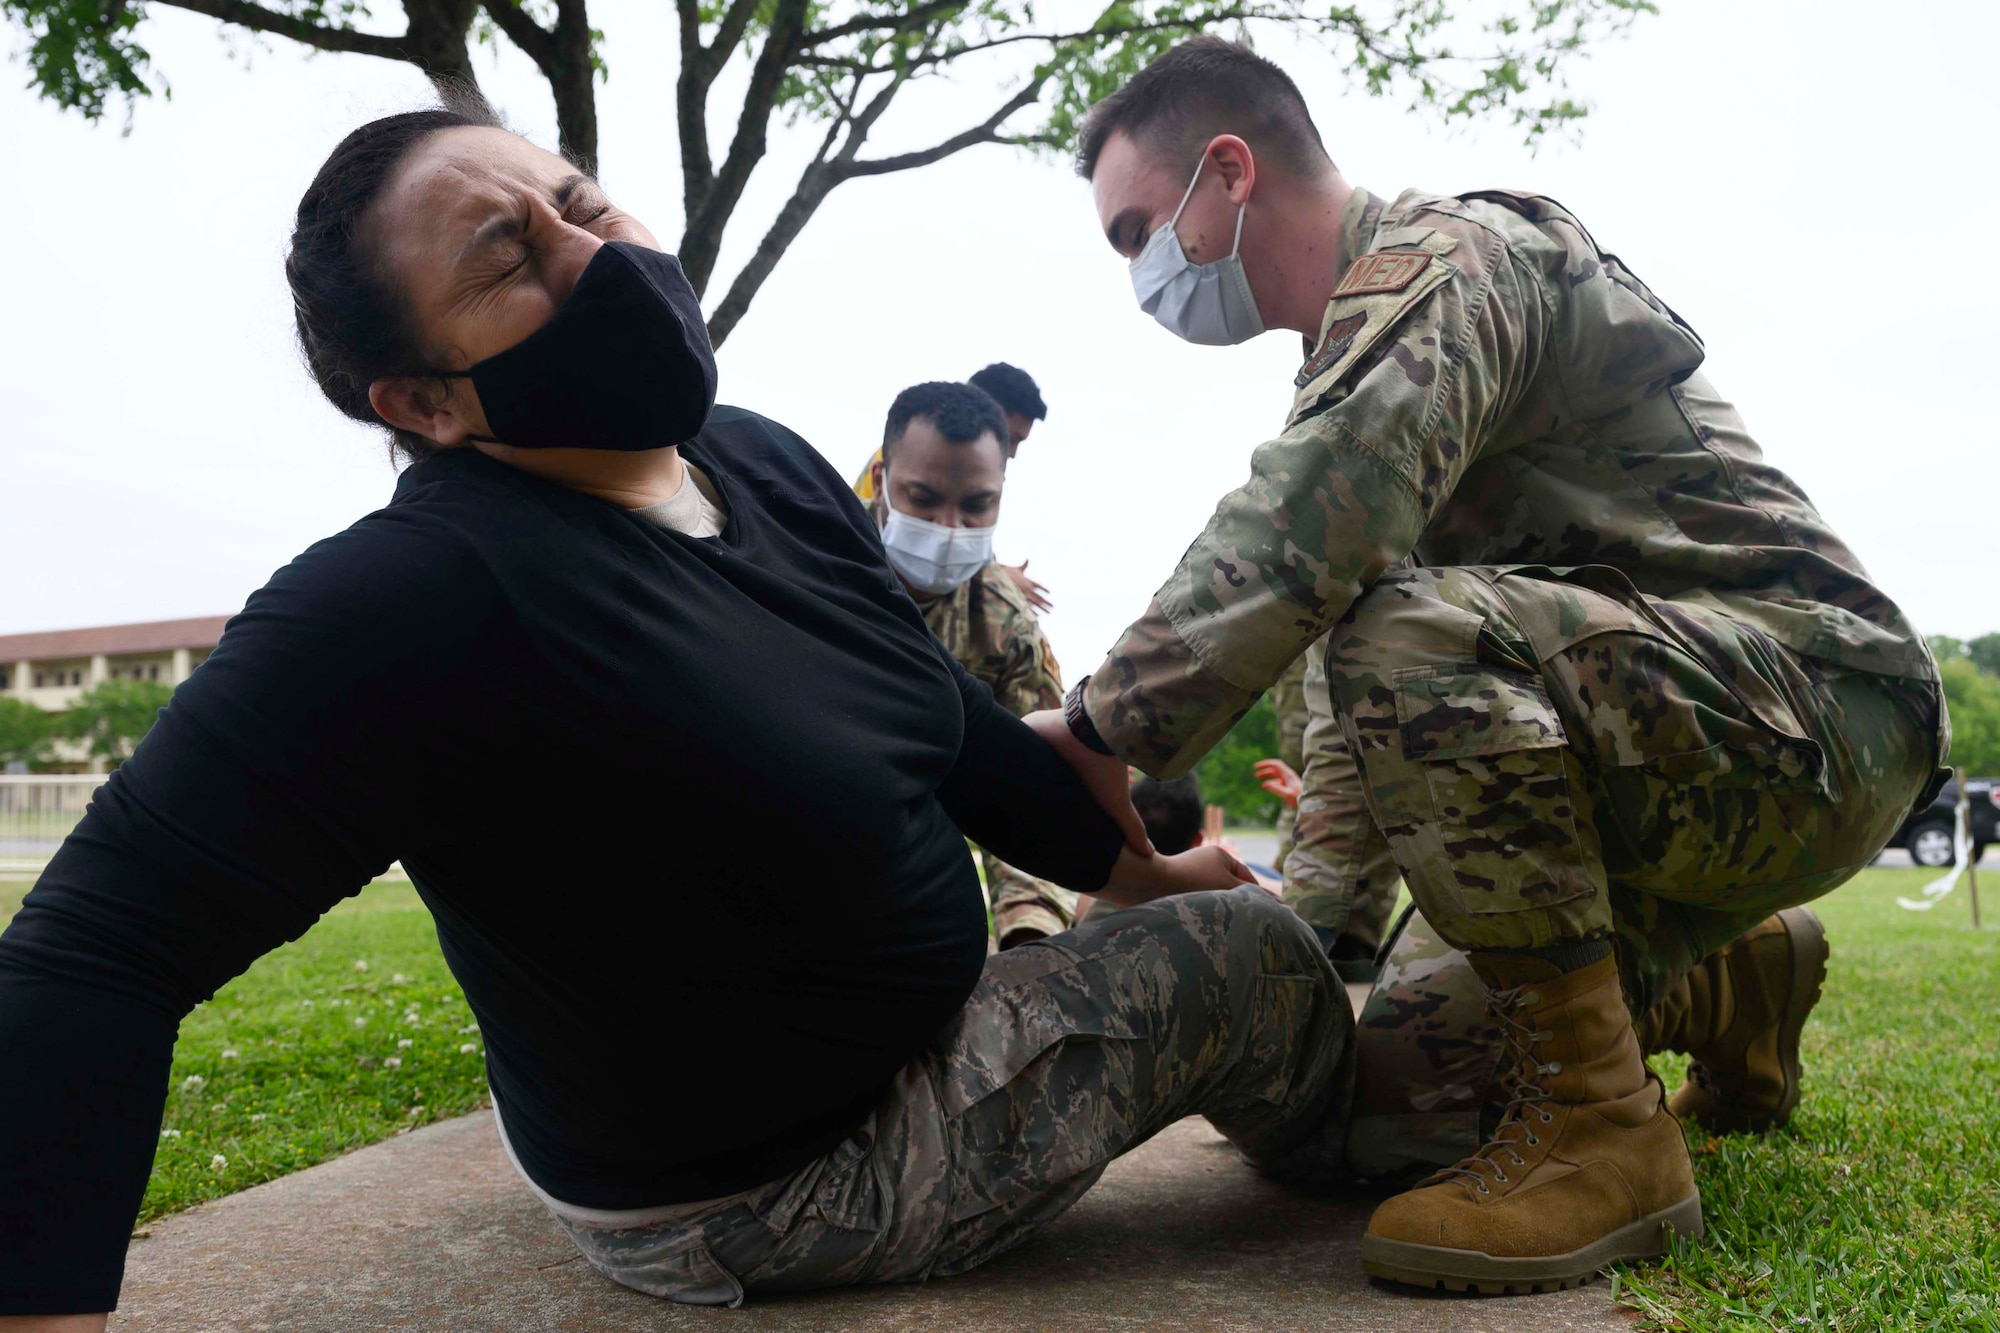 Photo of Airman taking part in a simulated casualty exercise.